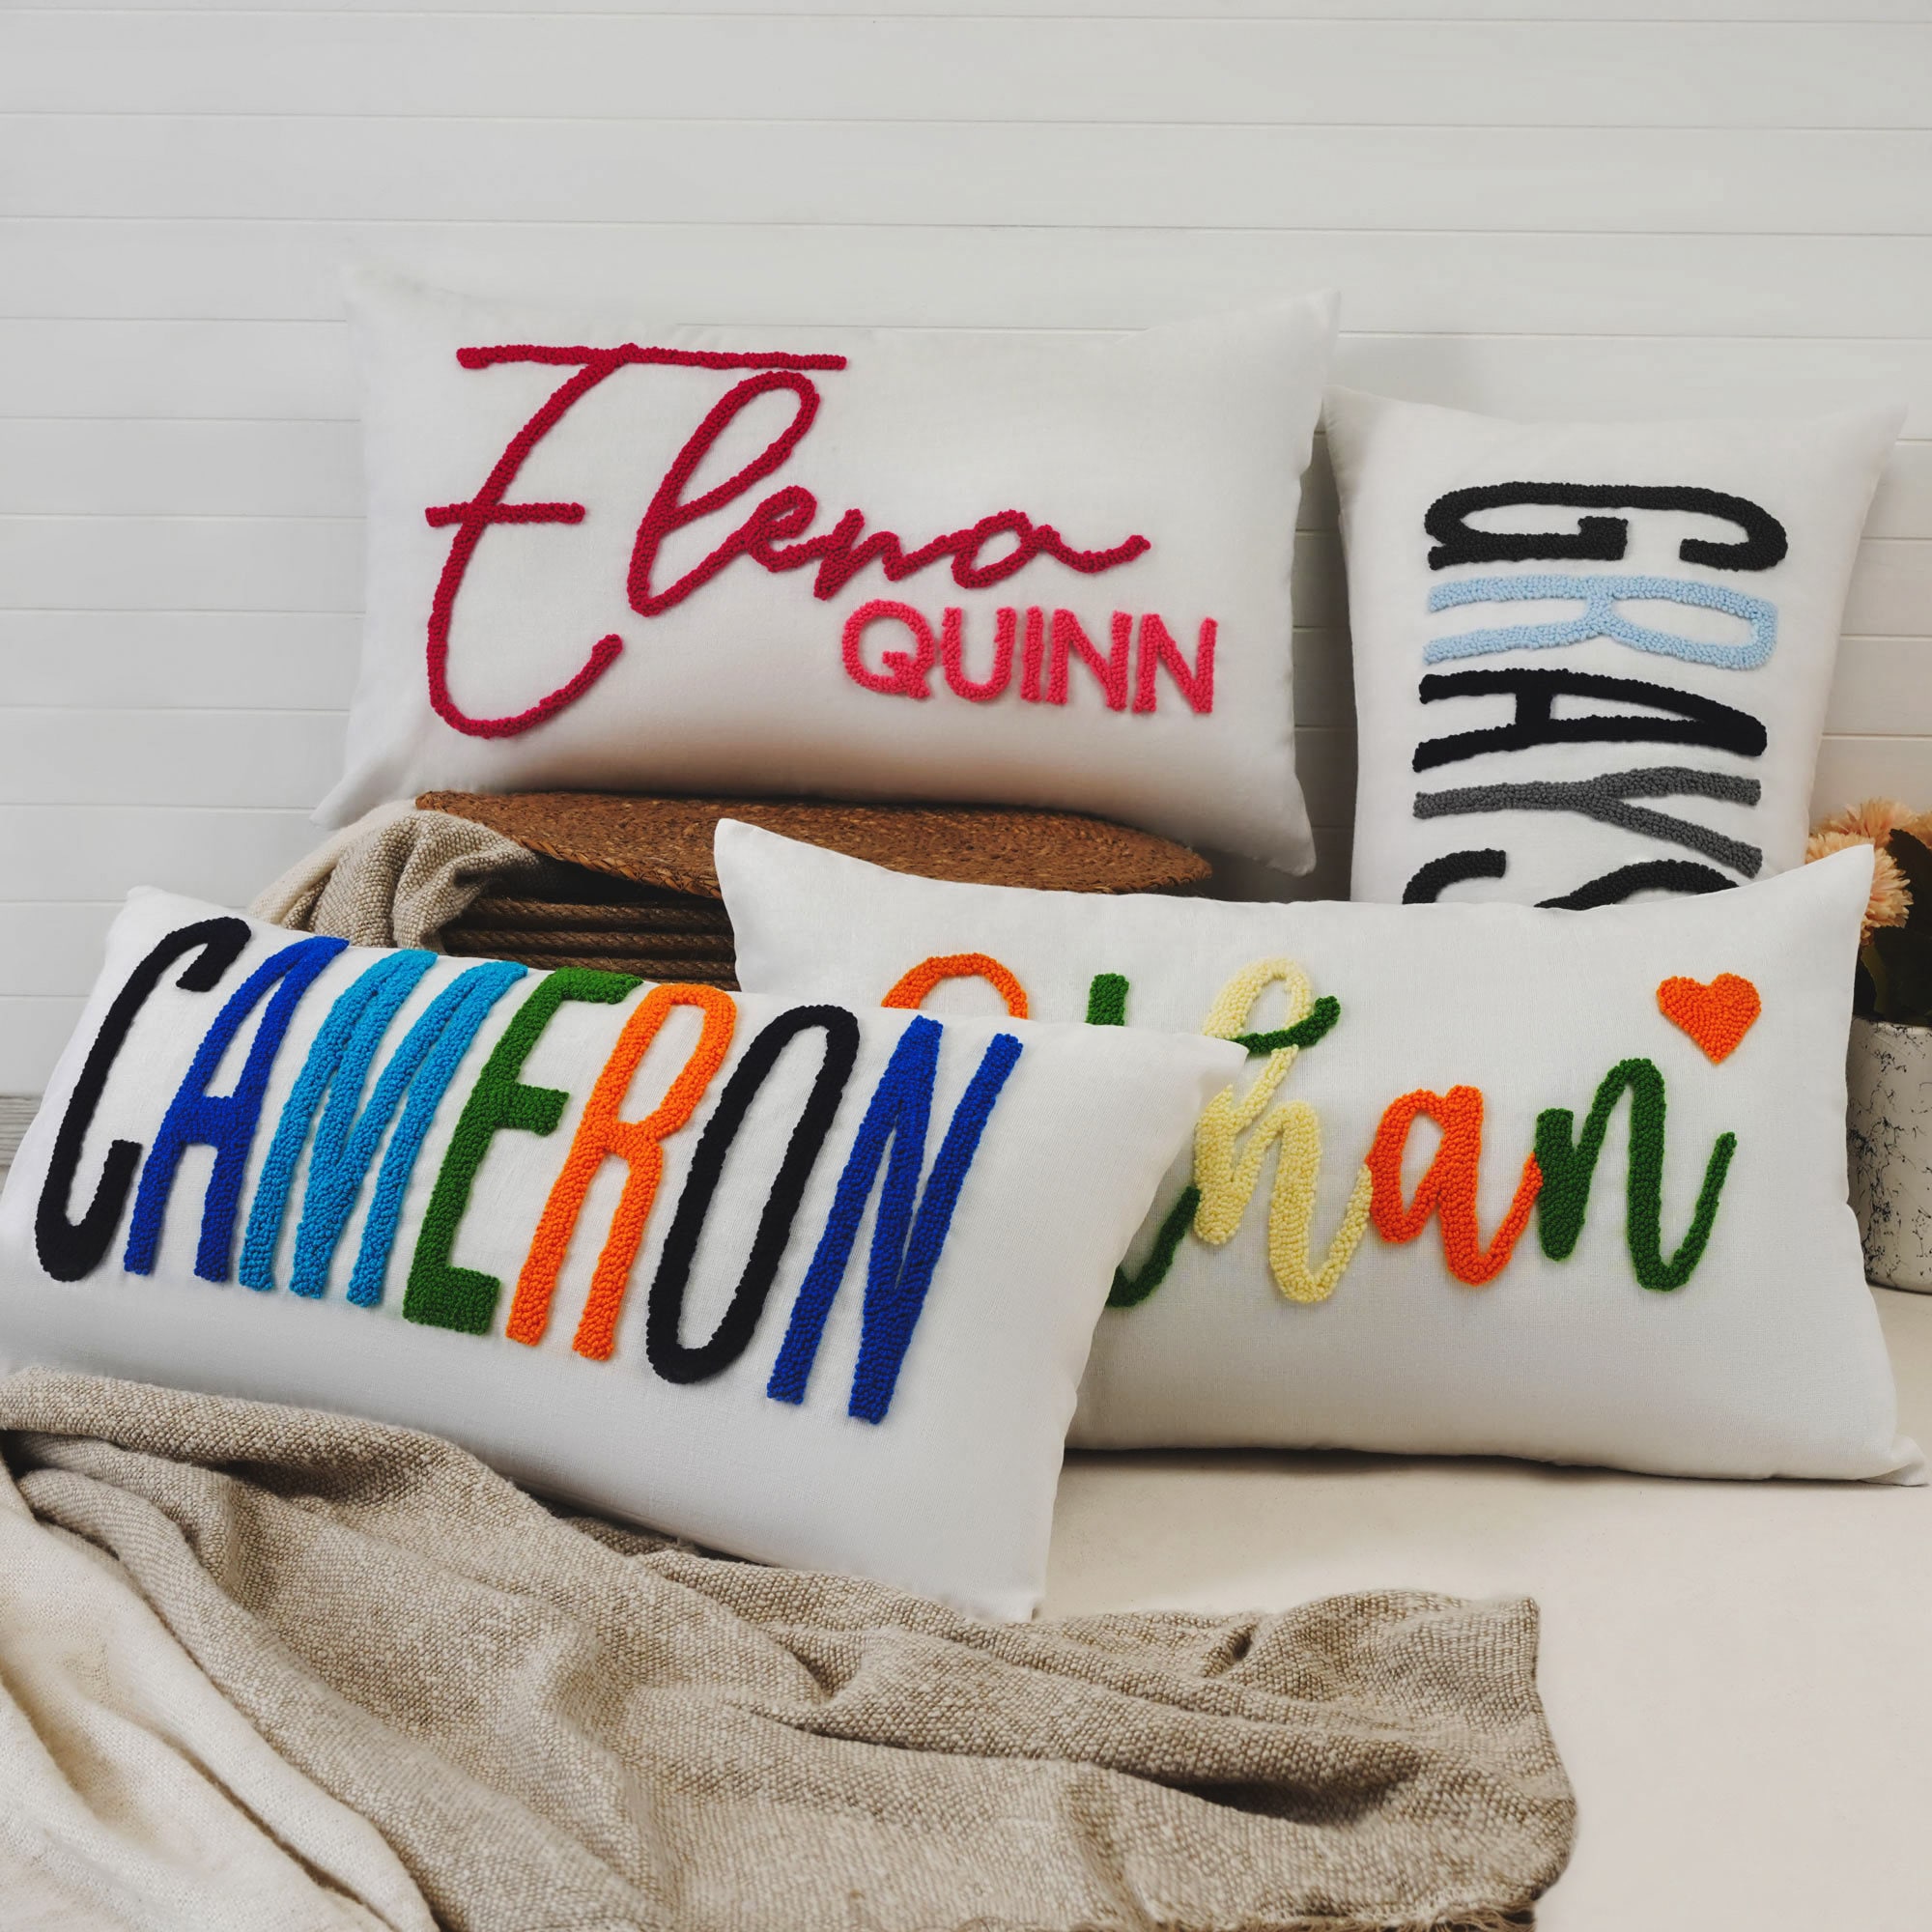 Personalized Name Pillows for Sale